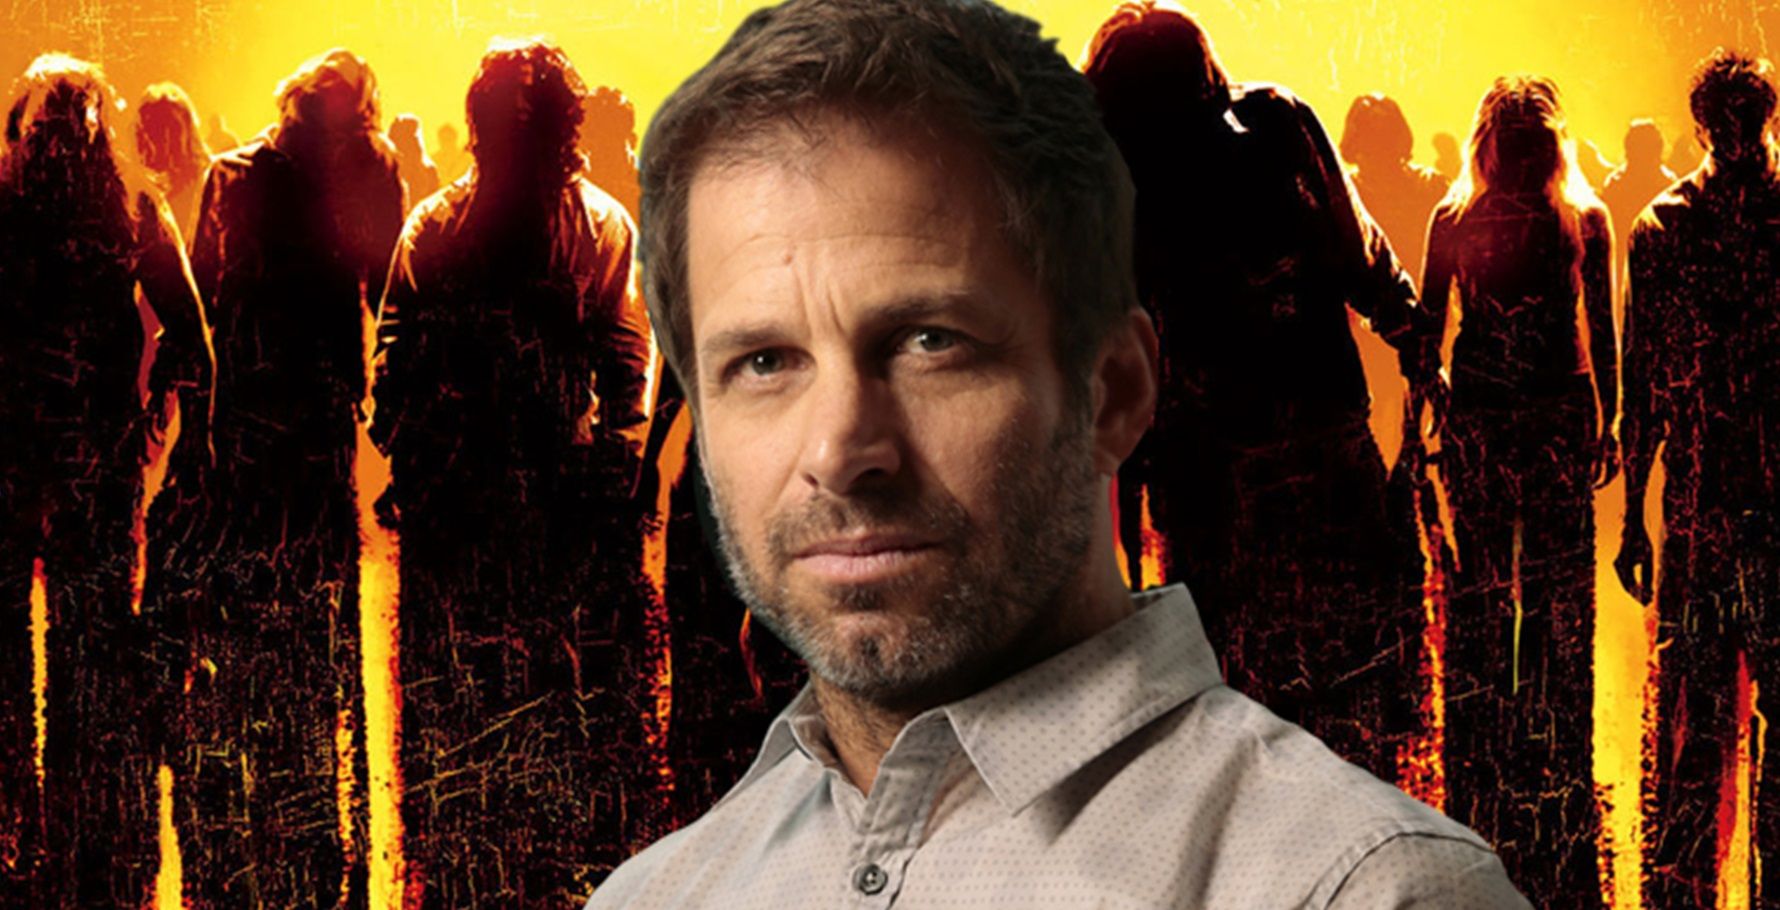 Zack Snyder Reveals 3 Projects He’s Working On After Army of the Dead